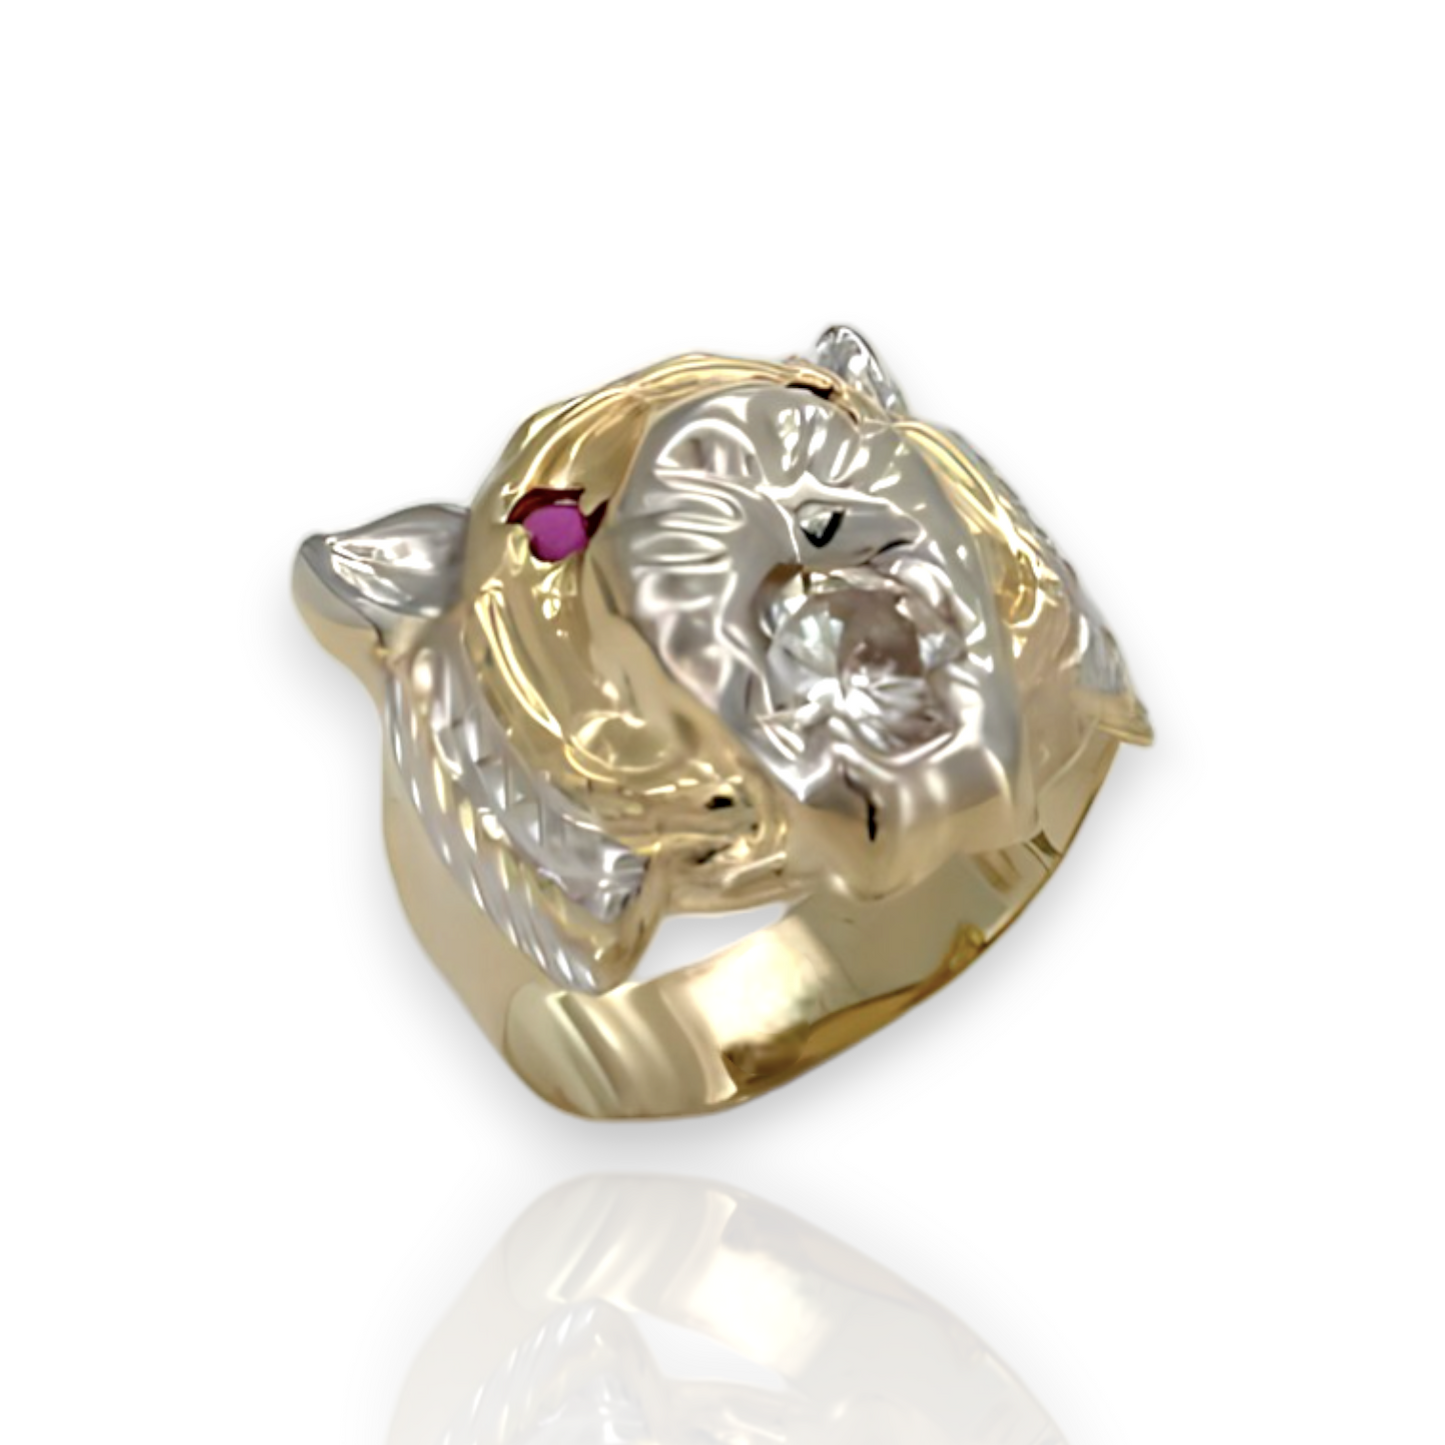 Textured Tiger Head Ruby Eyes CZ Yellow Gold Ring  - 10K Yellow Pave